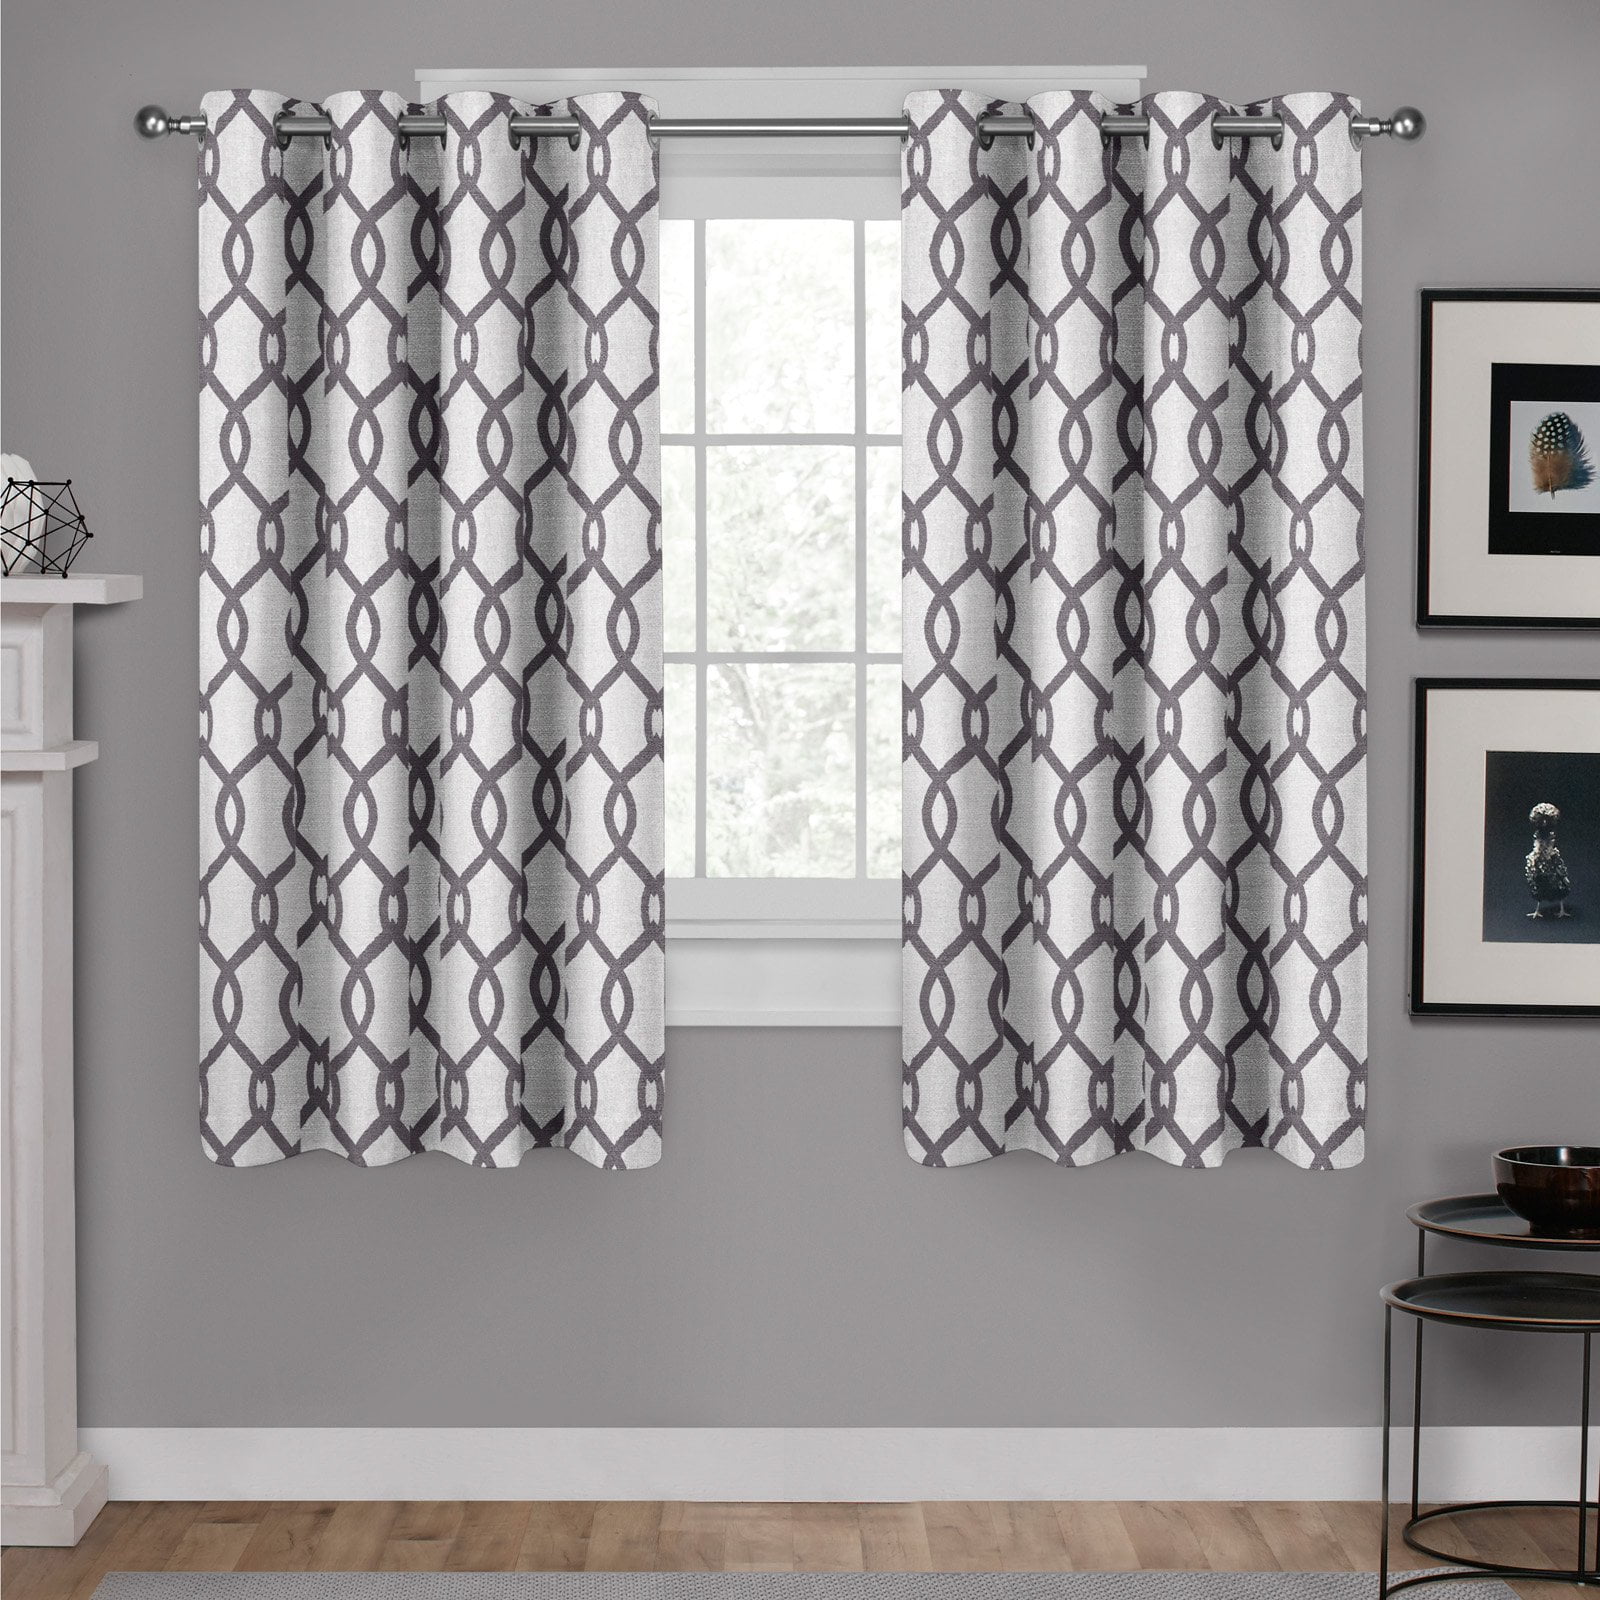 54x63 Exclusive Home Curtains Modo Metallic Geometric Light Filtering Grommet Top Curtain Panel Pair Winter White